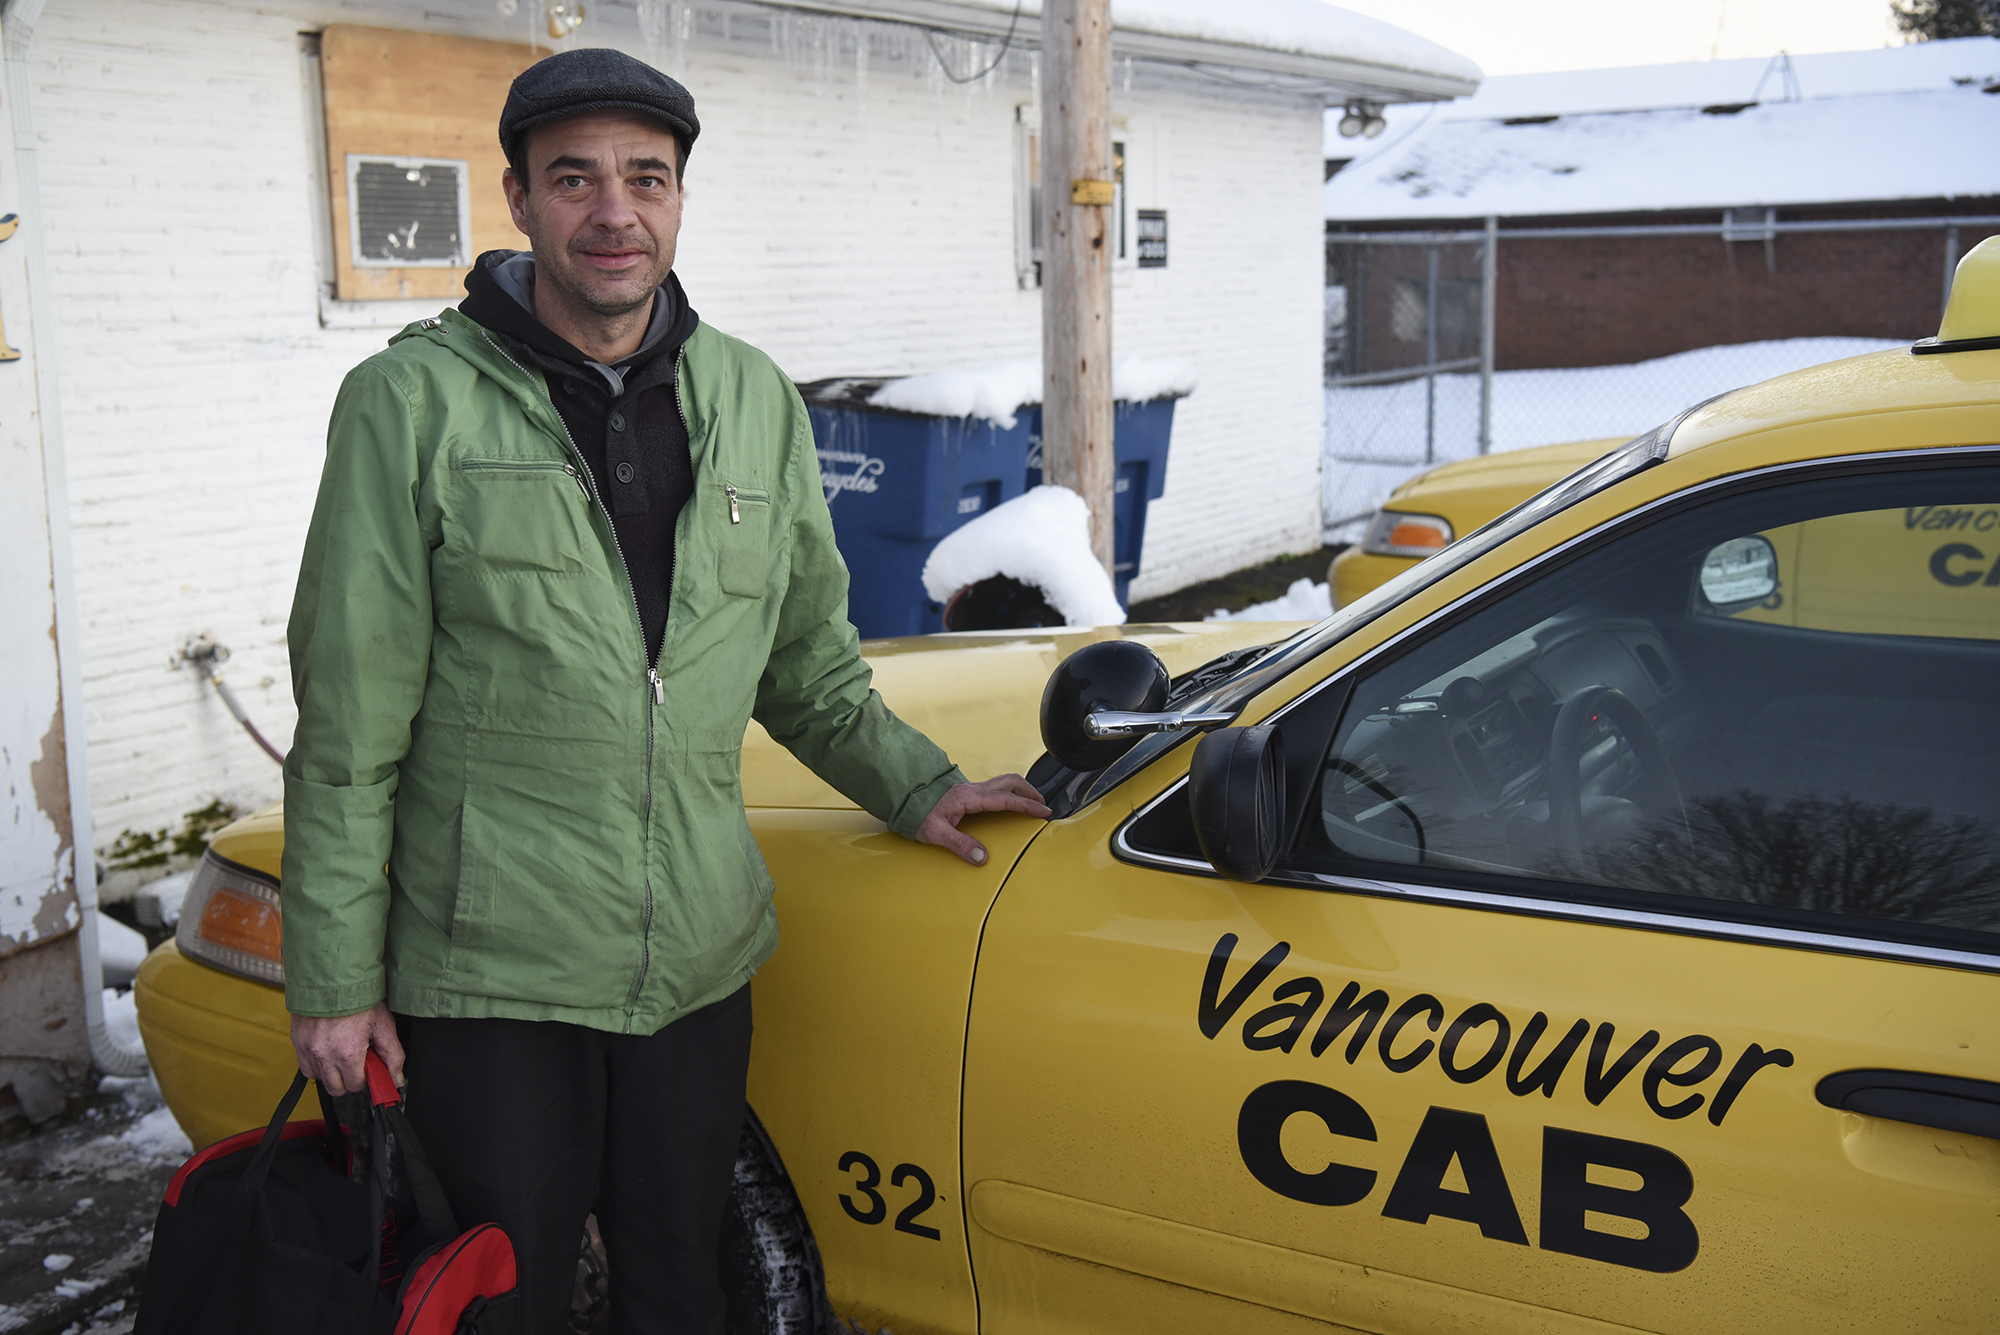 Taxi driver Jason Coffield stands outside a taxi at Vancouver Cab on Thursday evening.